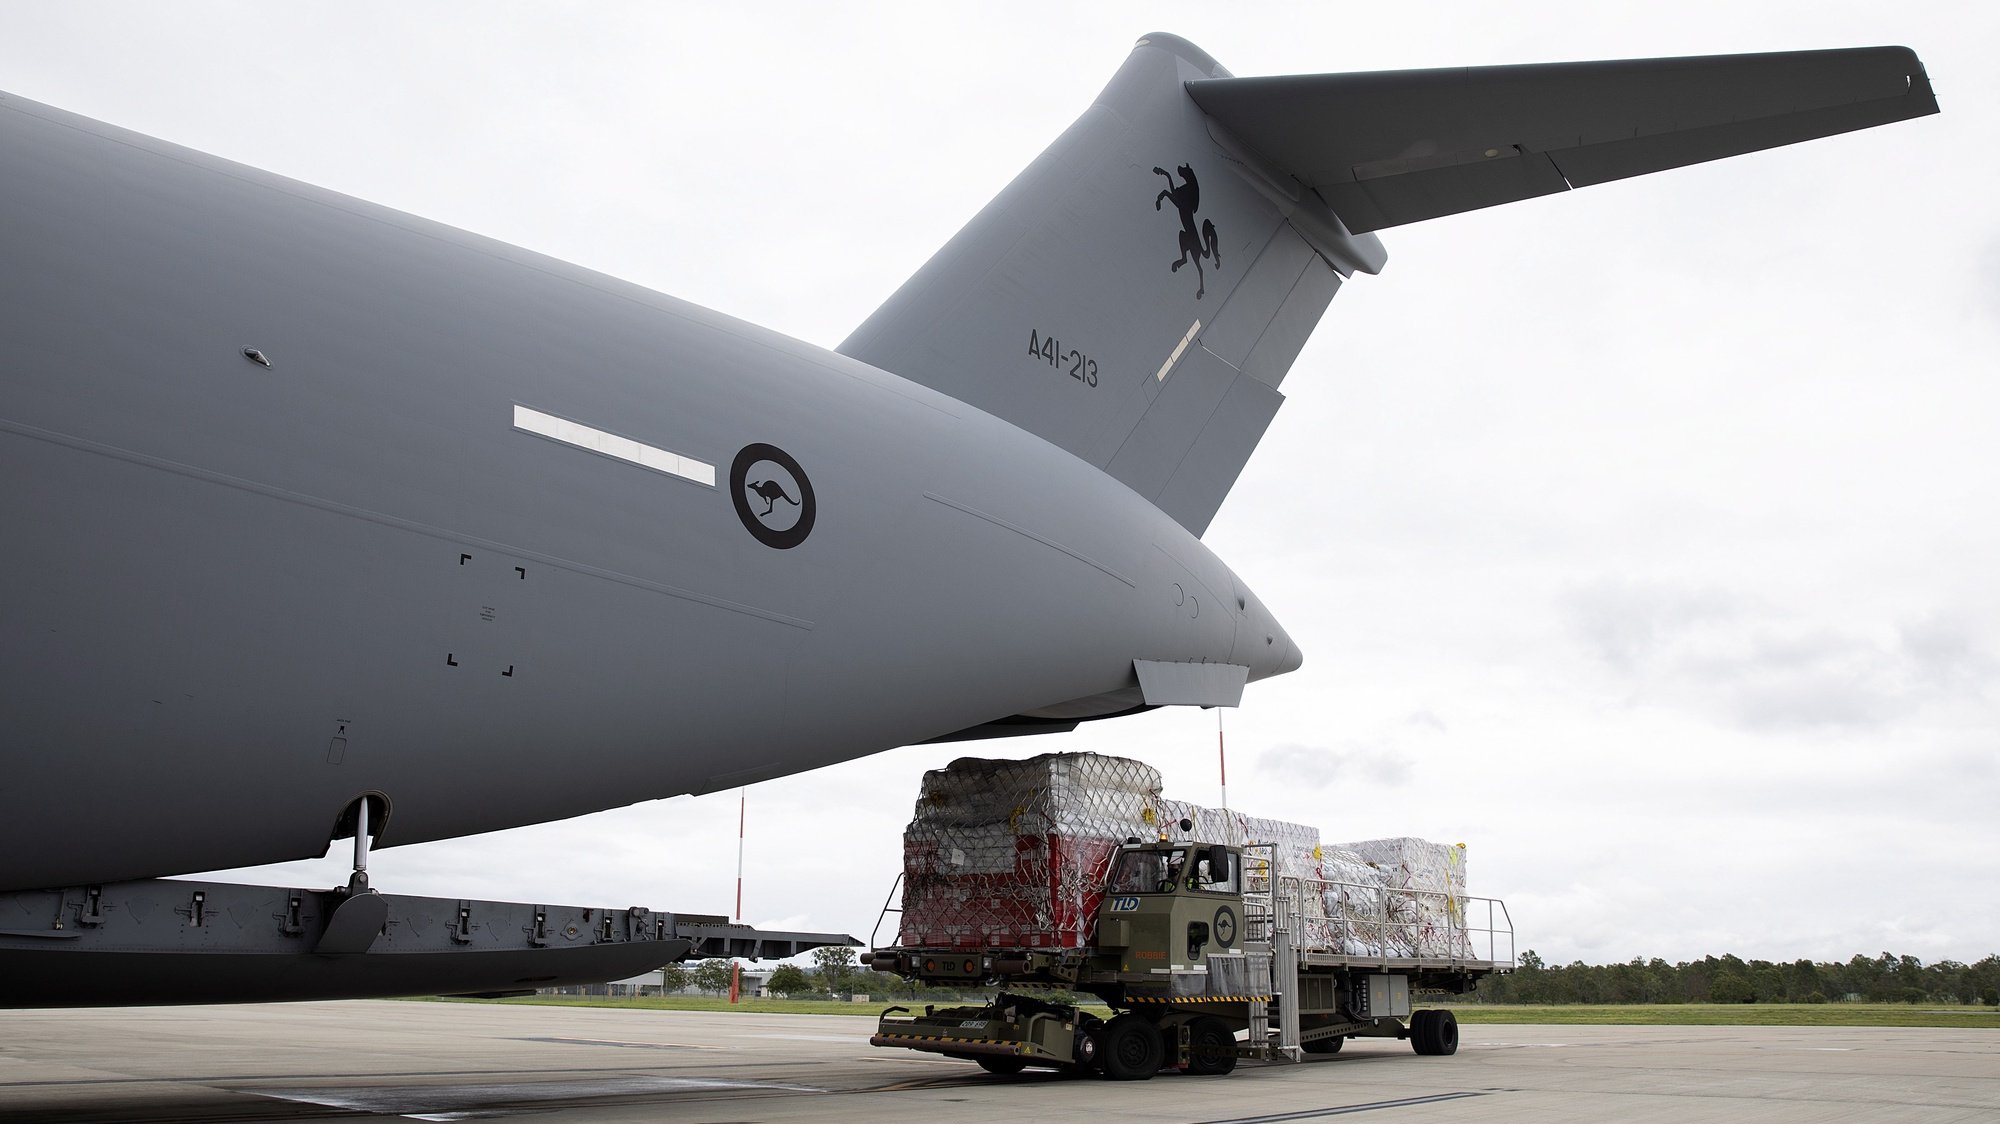 epa09696750 A handout photo made available by the Australian Government Department of Defence (DoD) shows Air Force Air Movements Operators from No. 23 Squadron loading humantarian assistance supplies bound for Tonga onto a C-17A Globemaster III strategic transport aircraft at Royal Australian Air Force (RAAF) Base Amberley, Queensland, Australia, 20 January 2022, following the eruption of Tonga&#039;s Hunga Tonga- Hunga Ha&#039;apai underwater volcano on 15 January.  EPA/LACW KATE CZERNY/RAAF HANDOUT -- MANDATORY CREDIT: COMMONWEALTH OF AUSTRALIA 2022, DEPARTMENT OF DEFENCE -- HANDOUT EDITORIAL USE ONLY/NO SALES *** Local Caption *** The Australian Defence Force is supporting the Department of Foreign Affairs and Trade (DFAT) coordinated mission to support the Government of Tonga following the eruption of Tongaâ€™s Hunga Tonga-Hunga Haâ€™apai underwater volcano on 15 January. 

Royal Australian Air Force C-17 Globemaster III strategic airlift aircraft are now flying humanitarian assistance supplies to Tonga as part of Operation Tonga Assist 22.